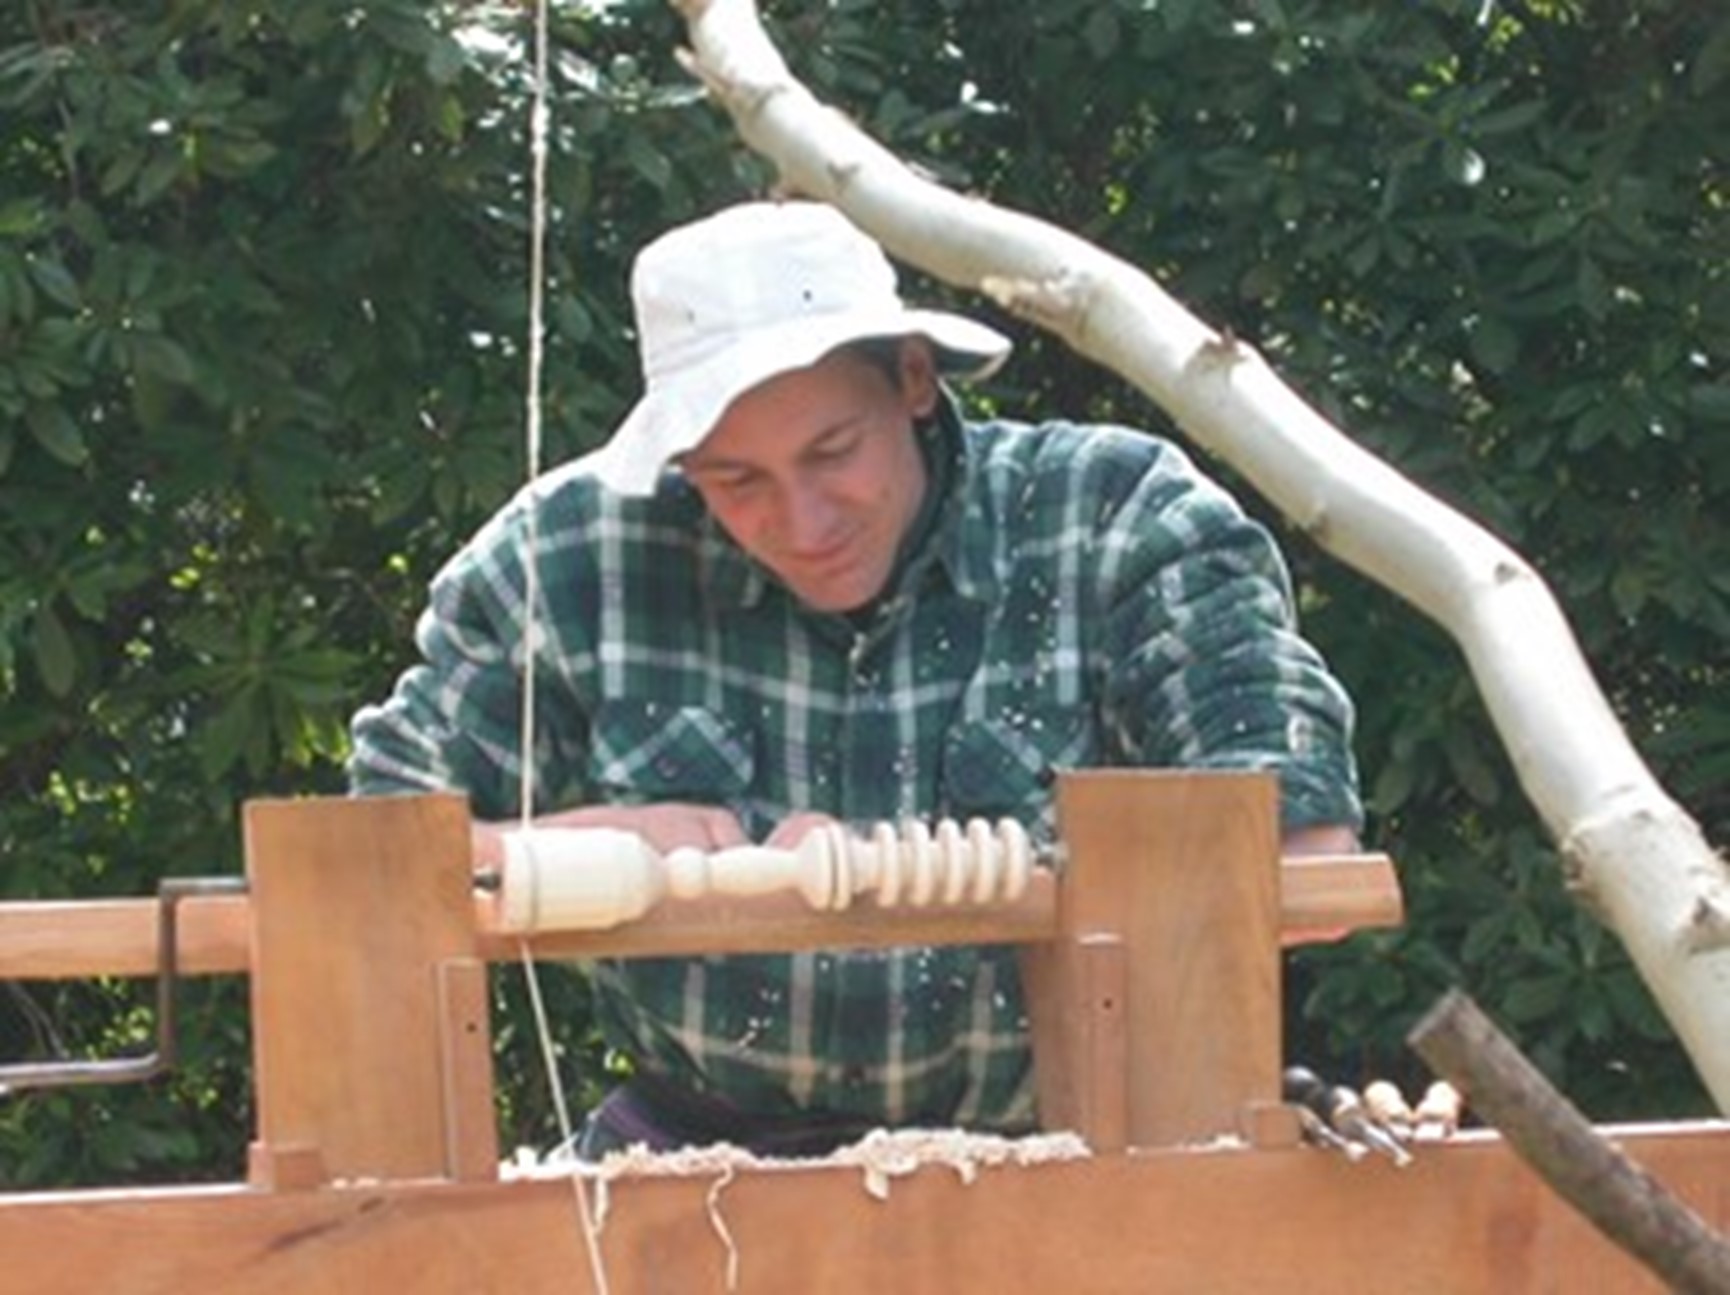 Green Woodworking event